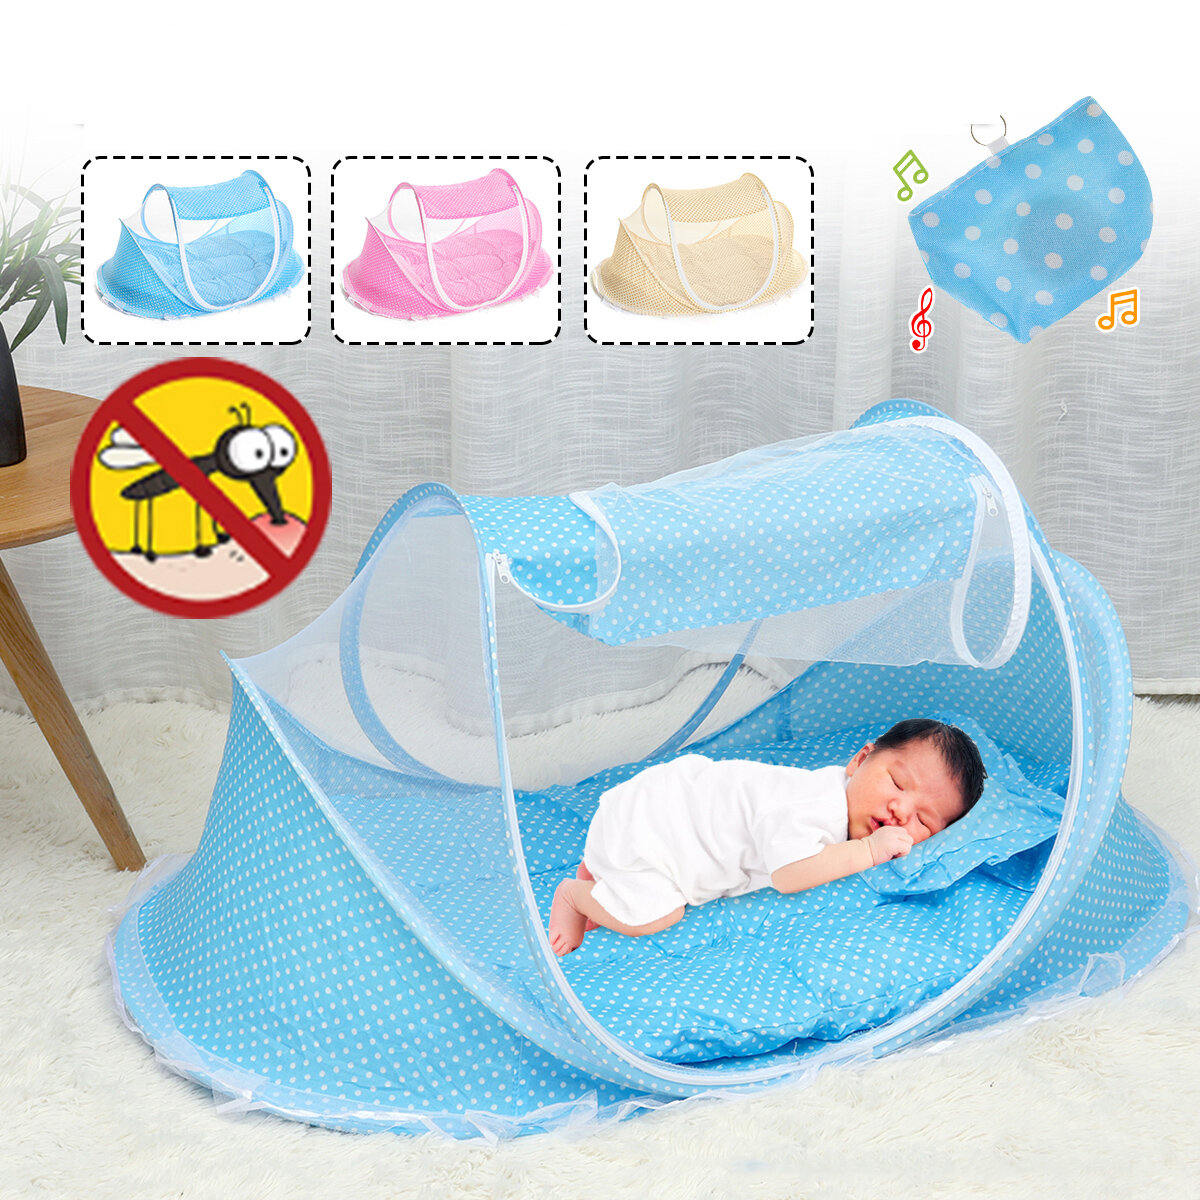 

Baby Infant Portable Foldable Travel Bed Crib Canopy Mosquito Net Pillowcase Tent Mattress for Baby Infant Playmats Tent